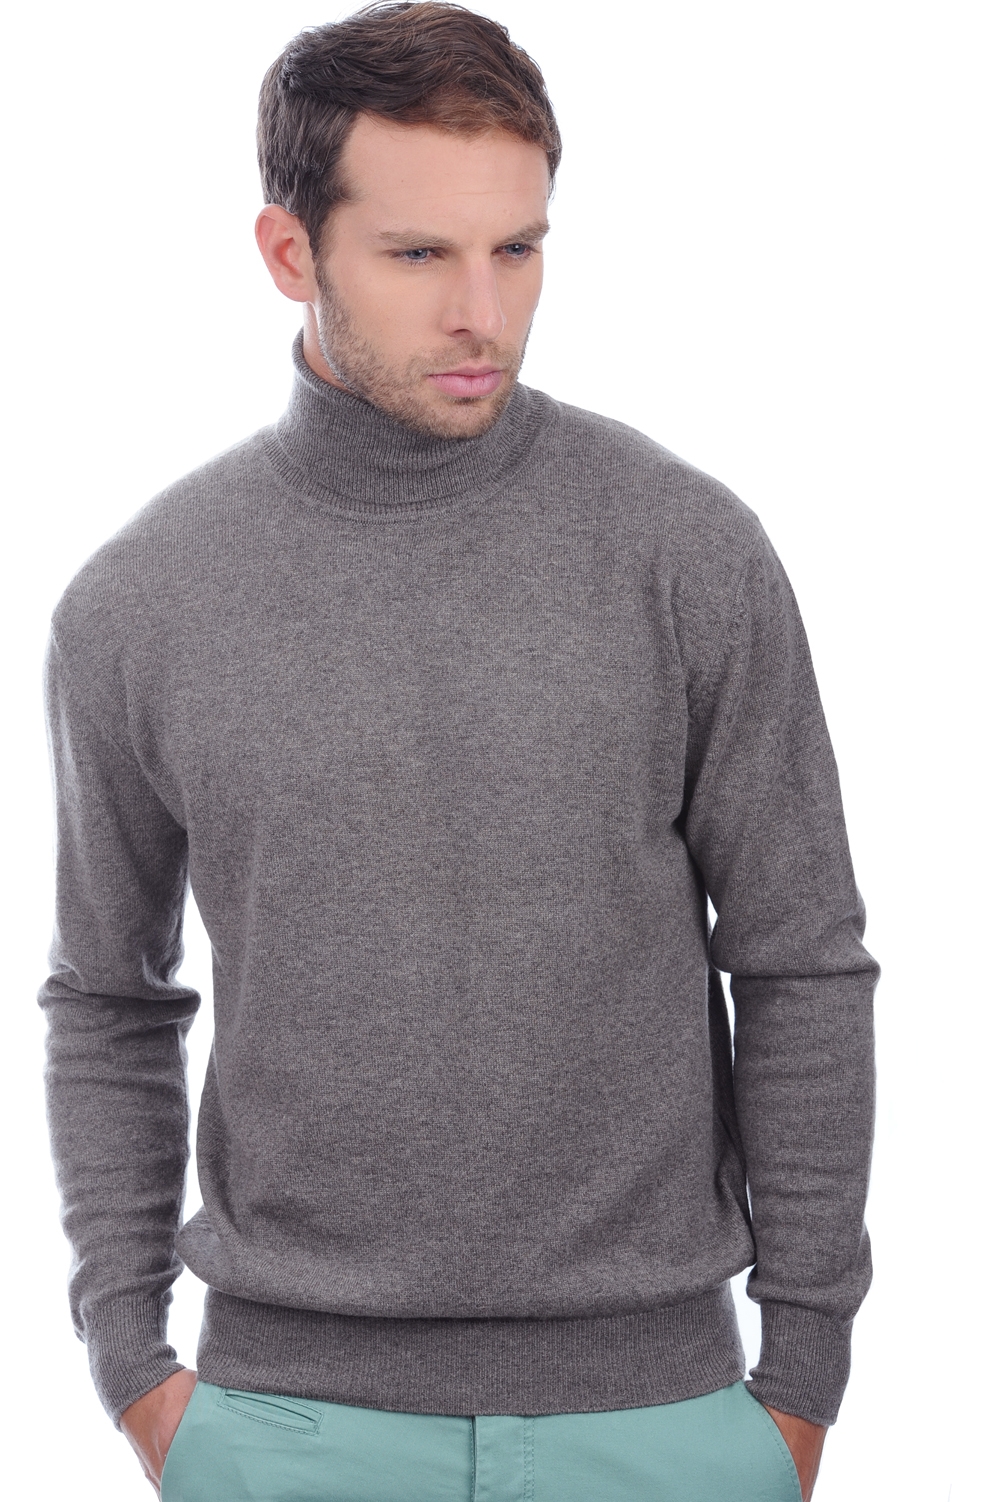 Cachemire pull homme col roule edgar marmotte chine m